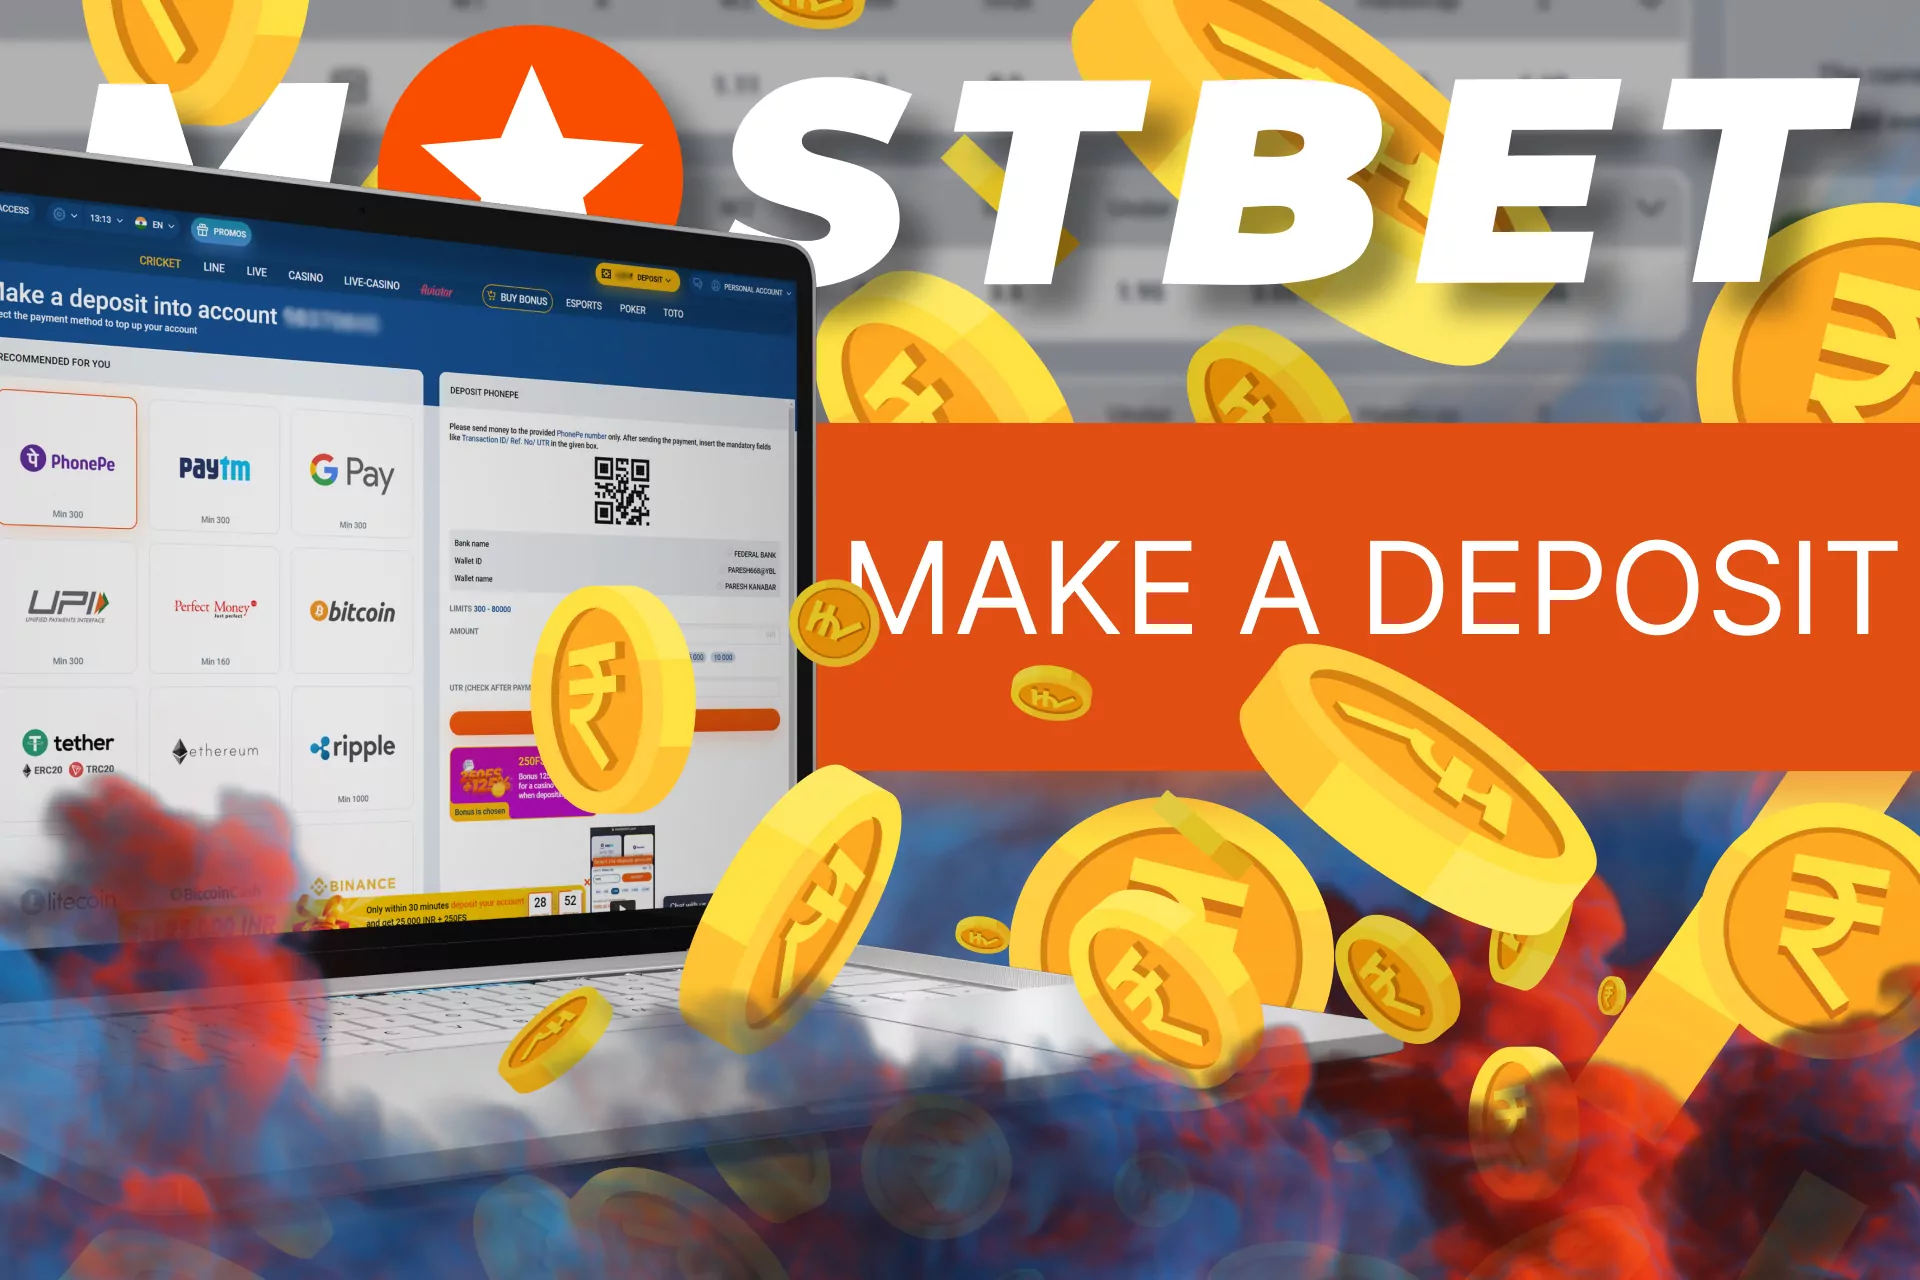 Find out how you can easily deposit your account at Mostbet.